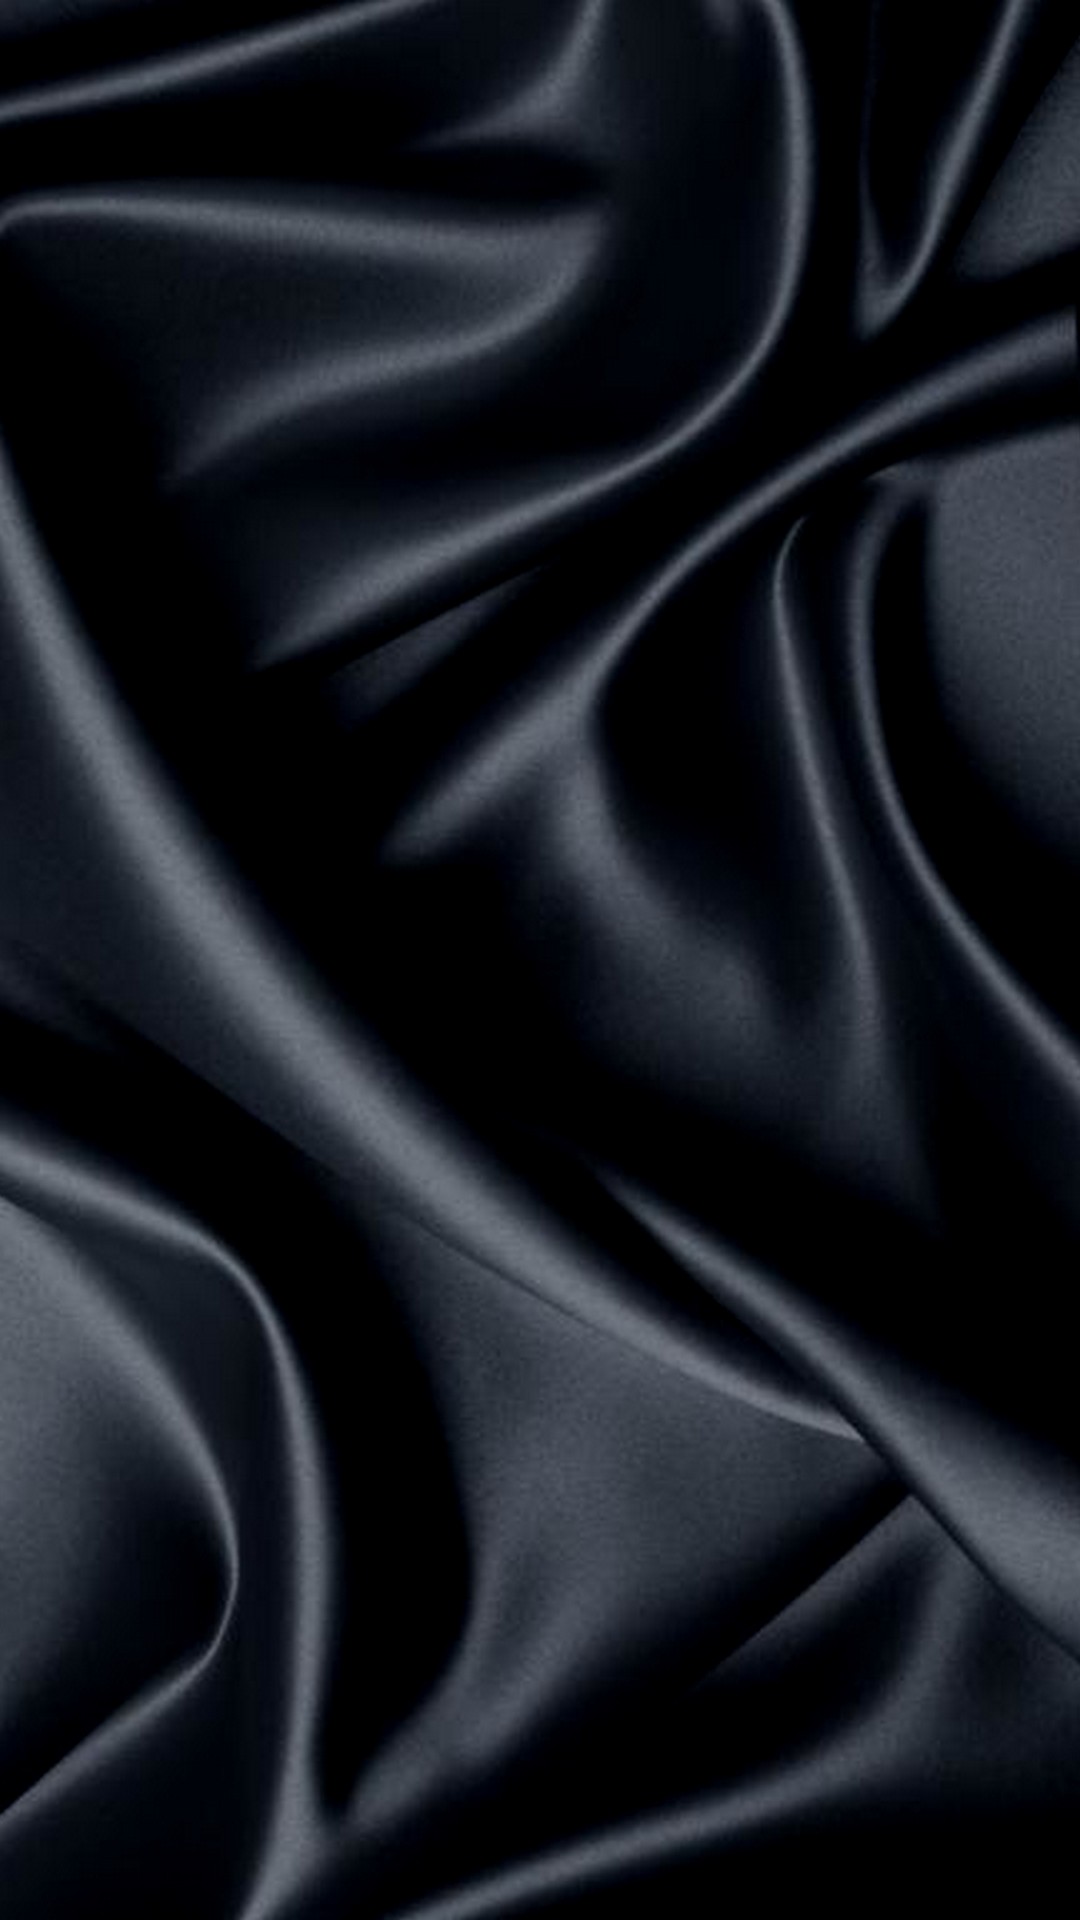 Black Silk Wallpaper for Phones with high-resolution 1080x1920 pixel. Download all Mobile Wallpapers and Use them as wallpapers for your iPhone, Tablet, iPad, Android and other mobile devices